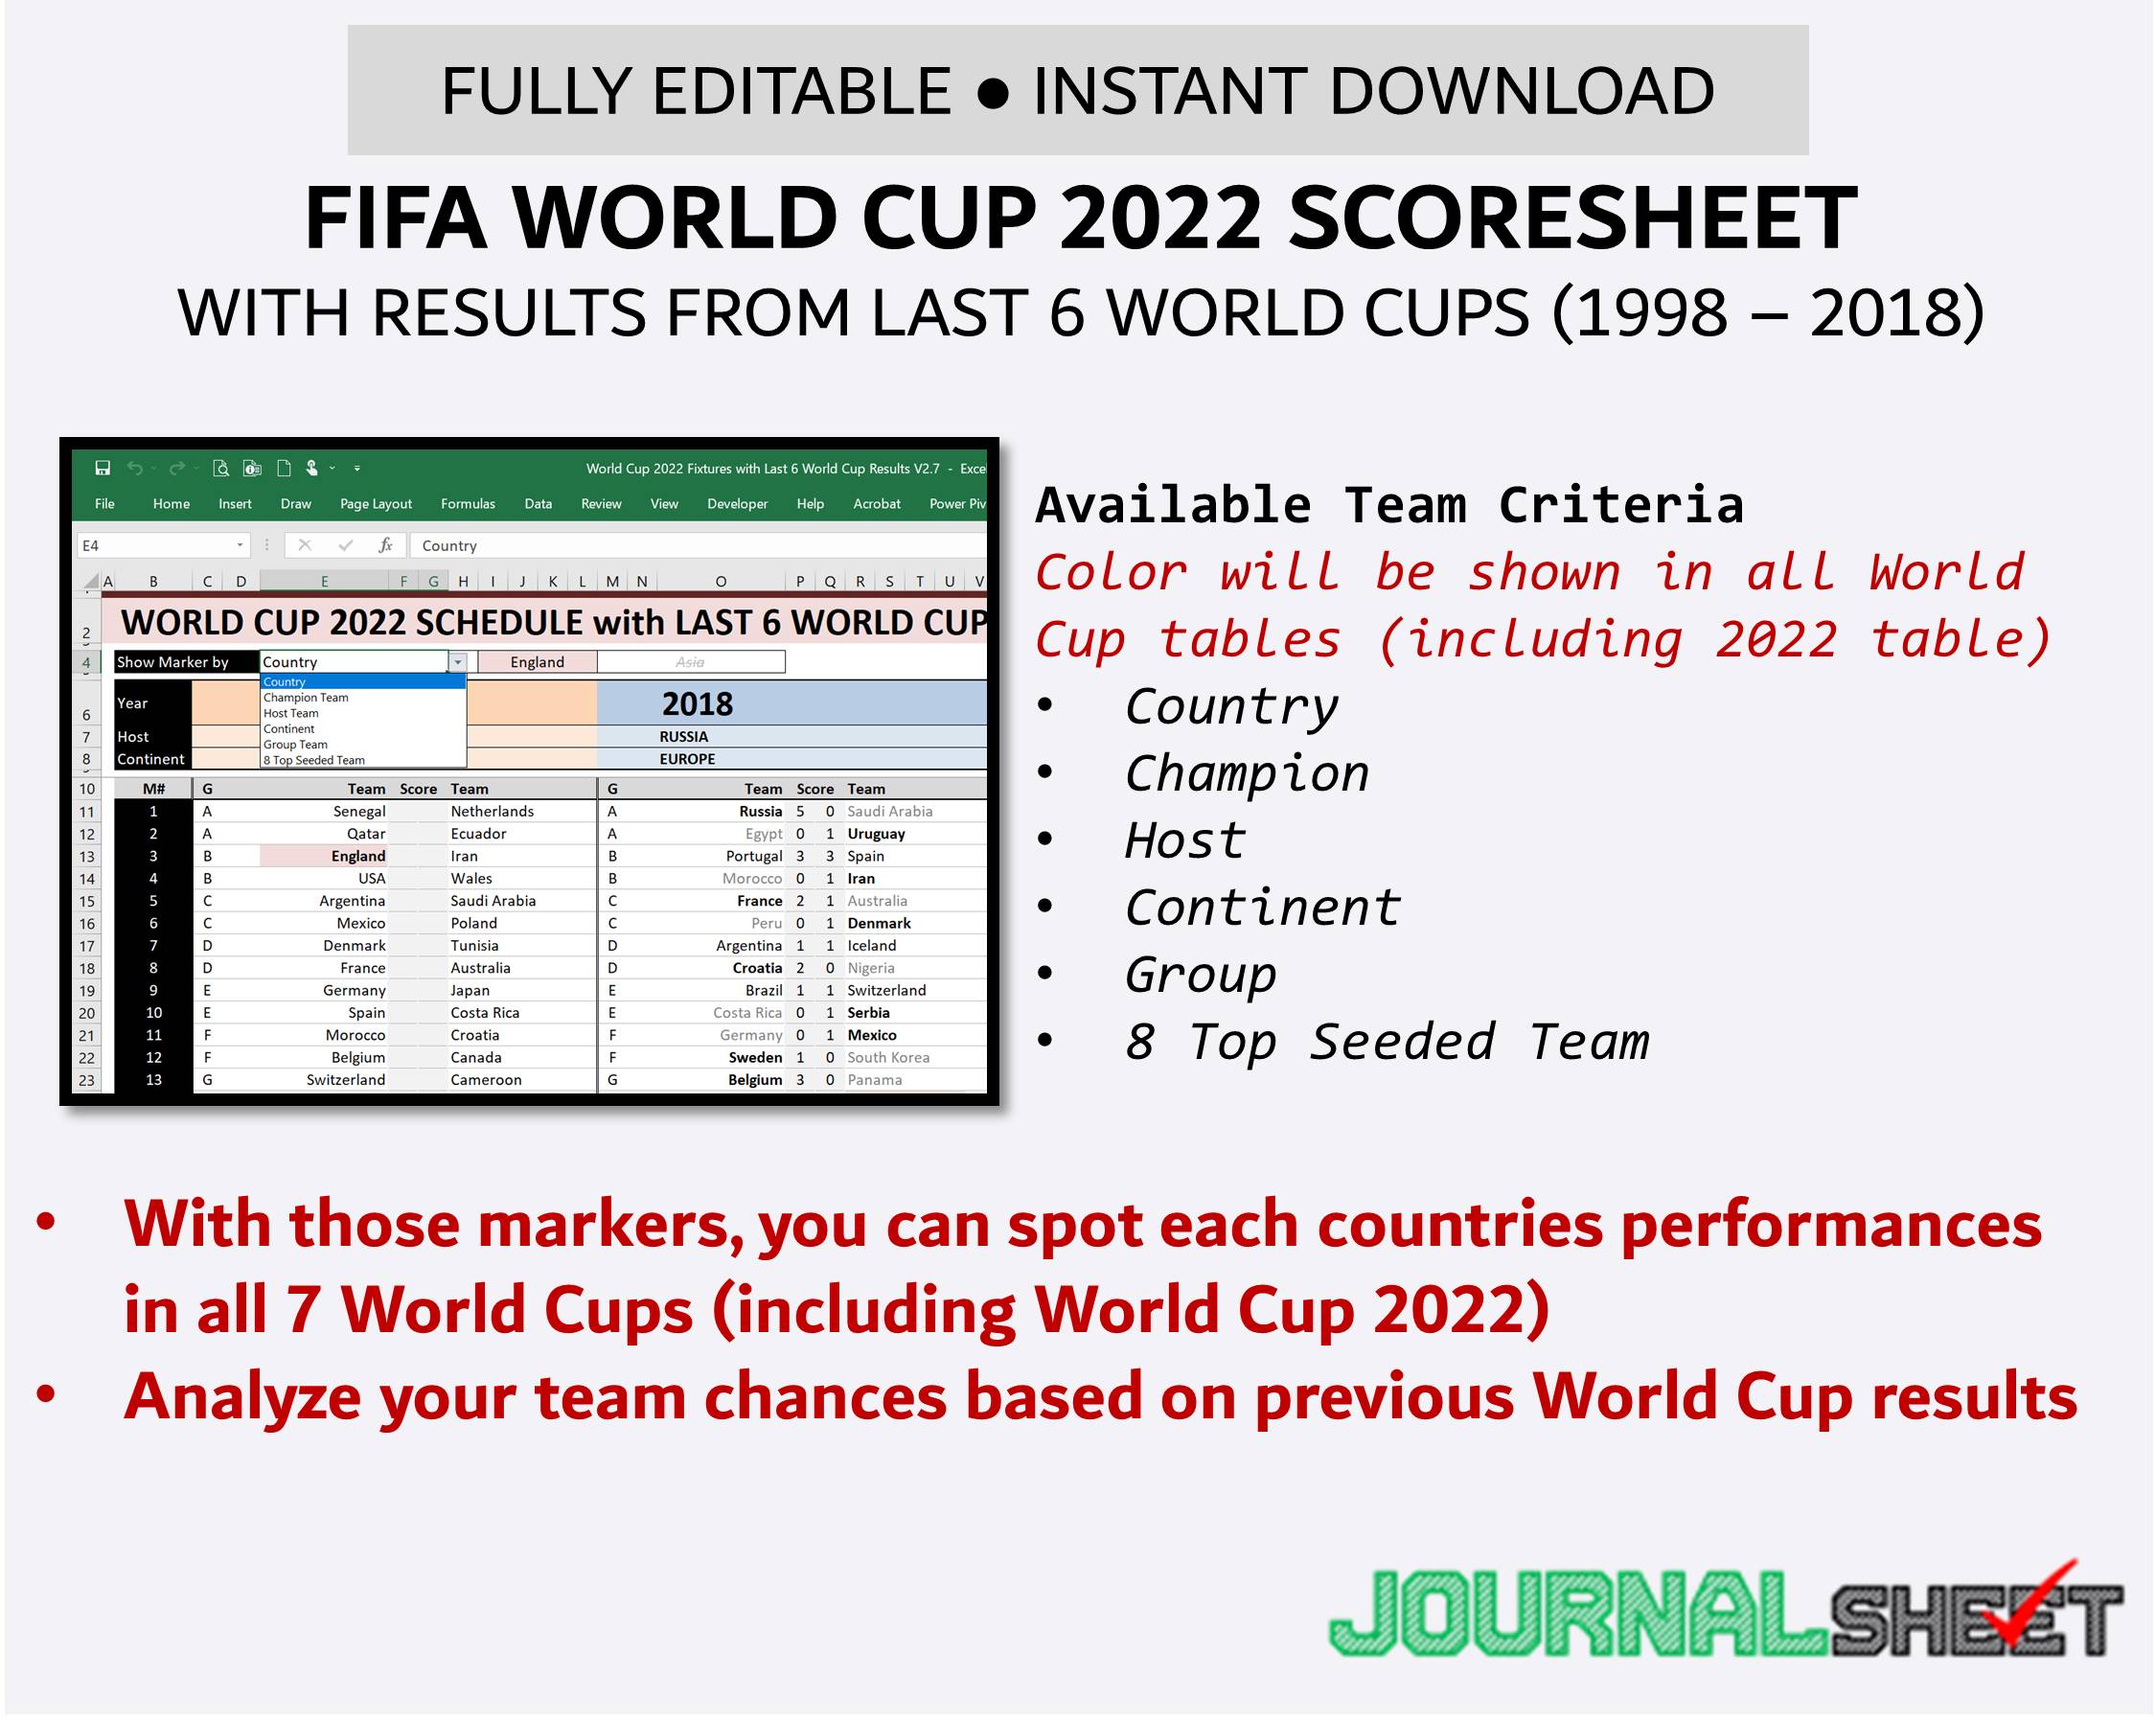 World Cup 2022 Team Head to Head Records